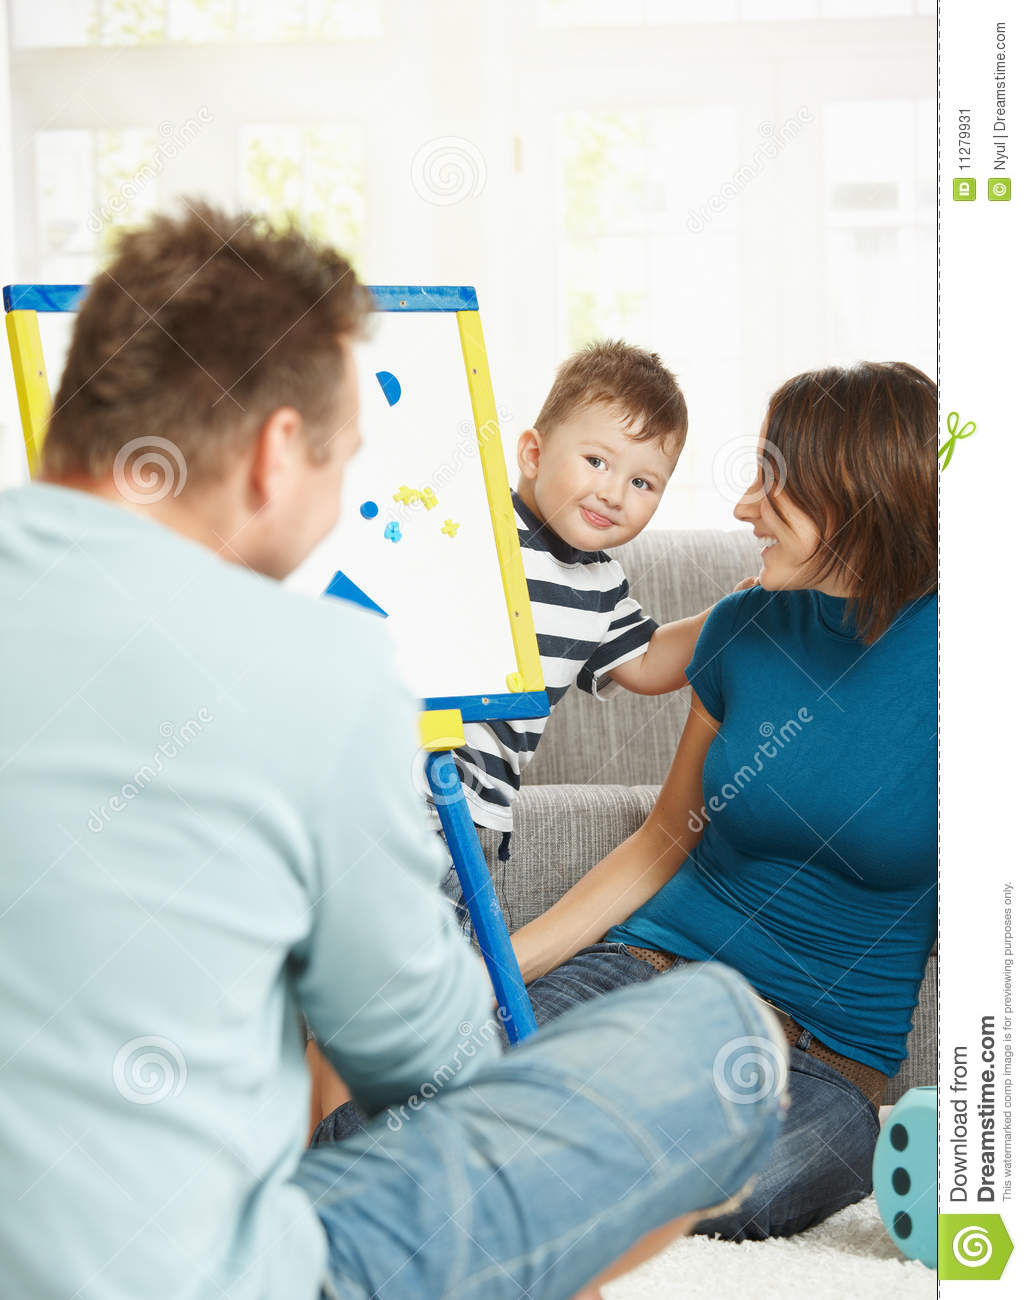 Father Mother And Boy Child Playing Together With Toy Whiteboard